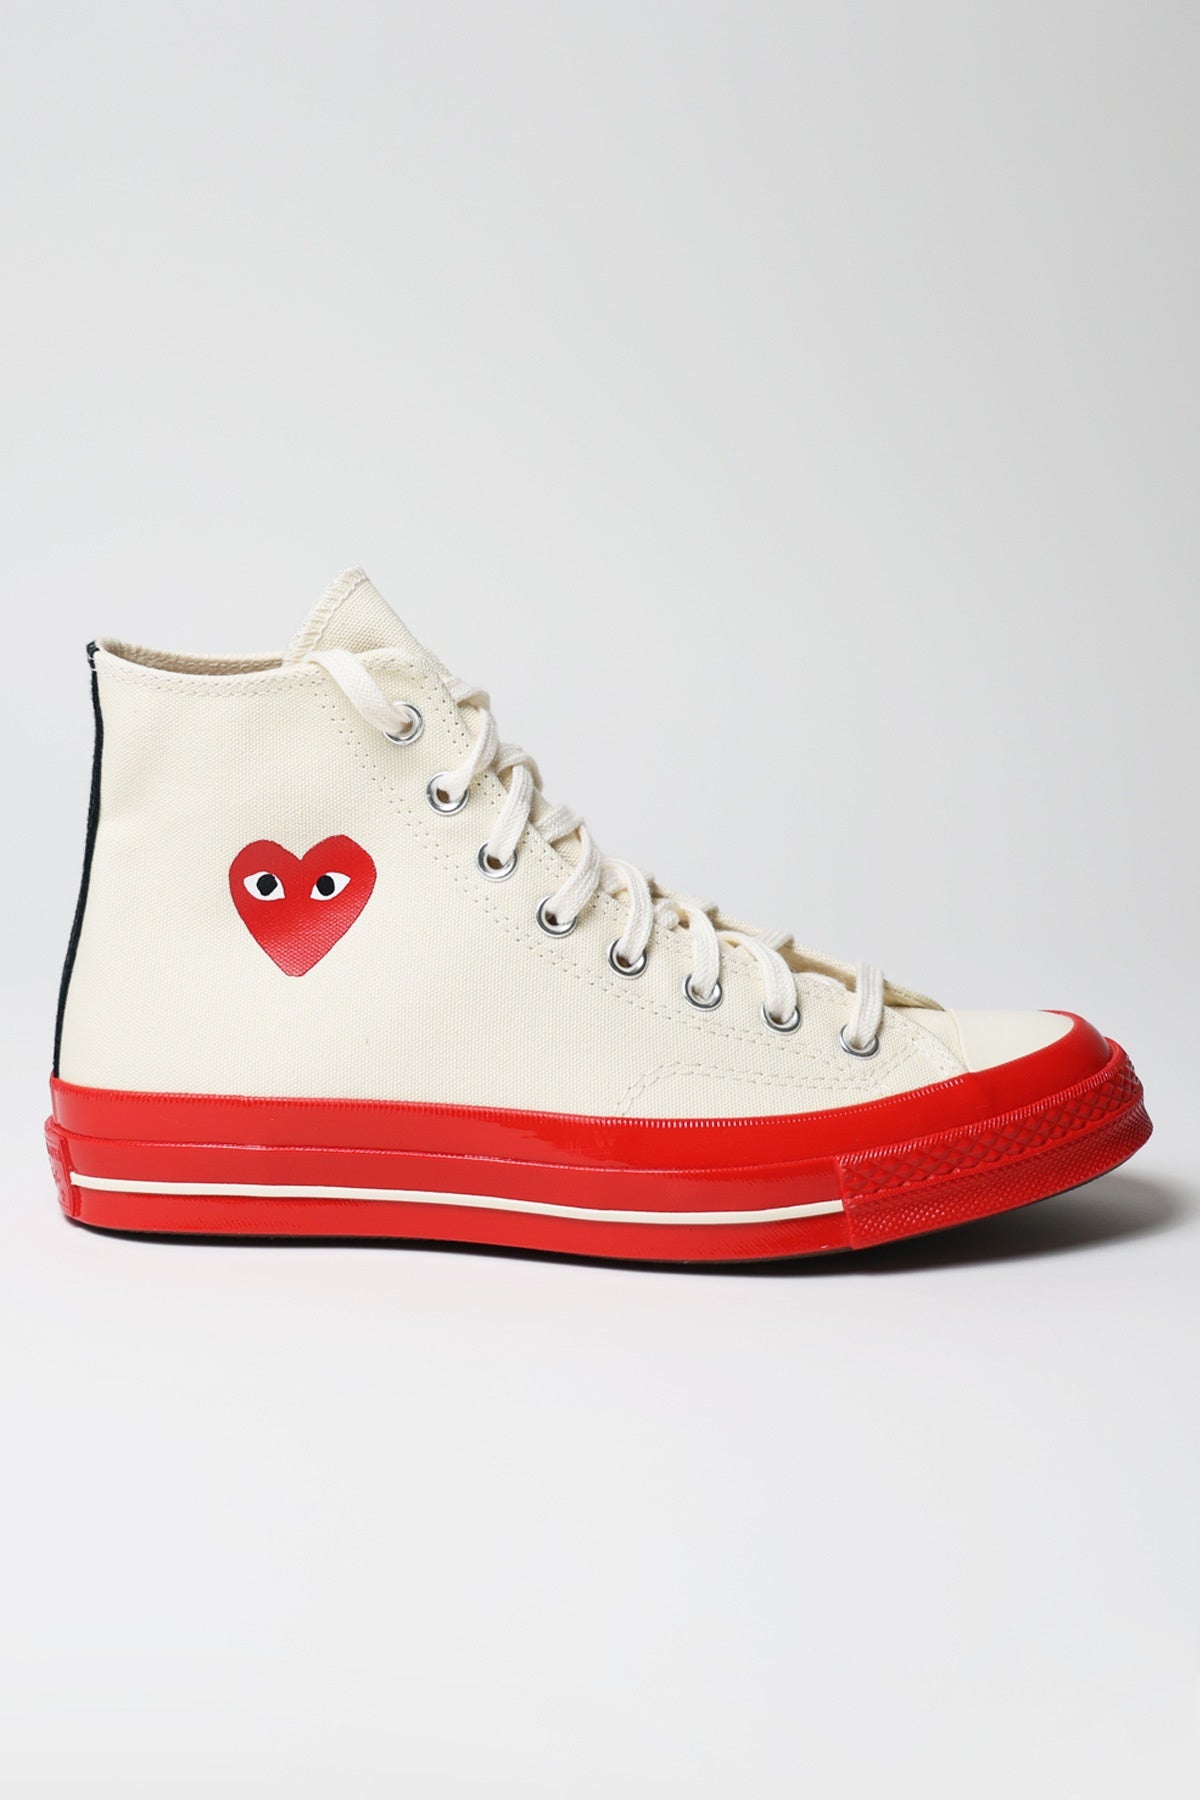 CdG PLAY x Converse Red Sole Hi - Off White